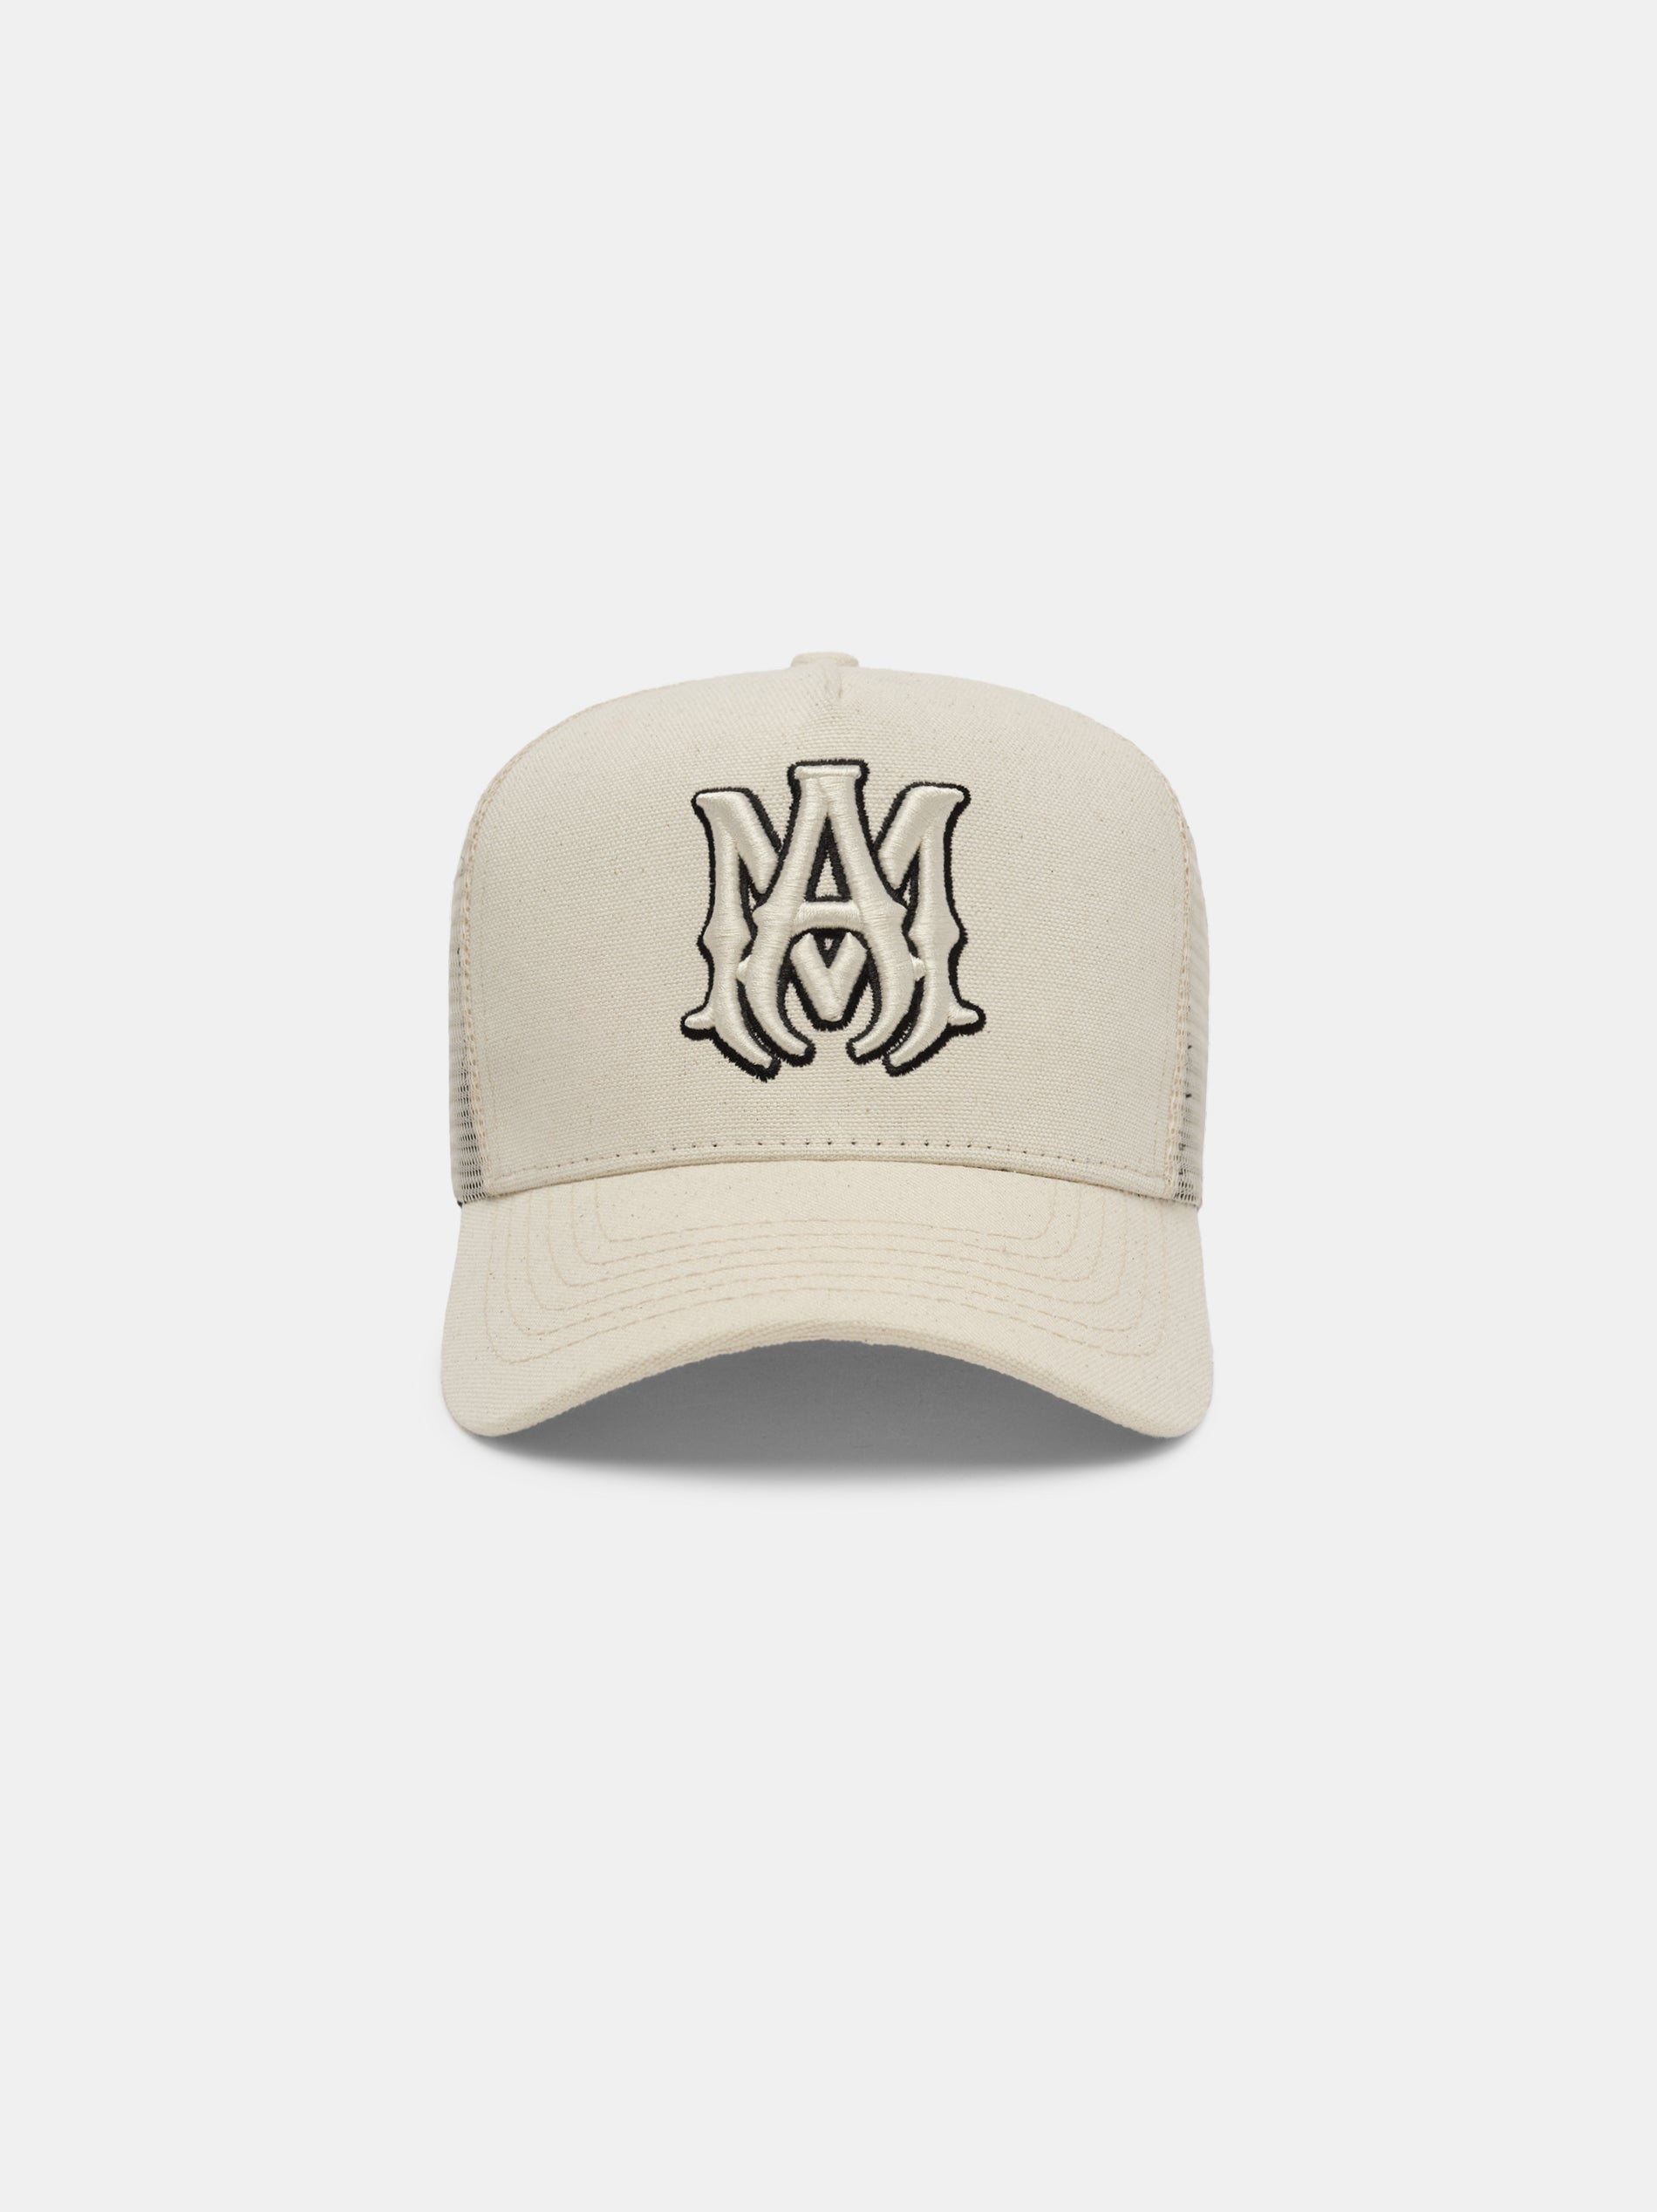 Product MA TRUCKER HAT - Natural featured image